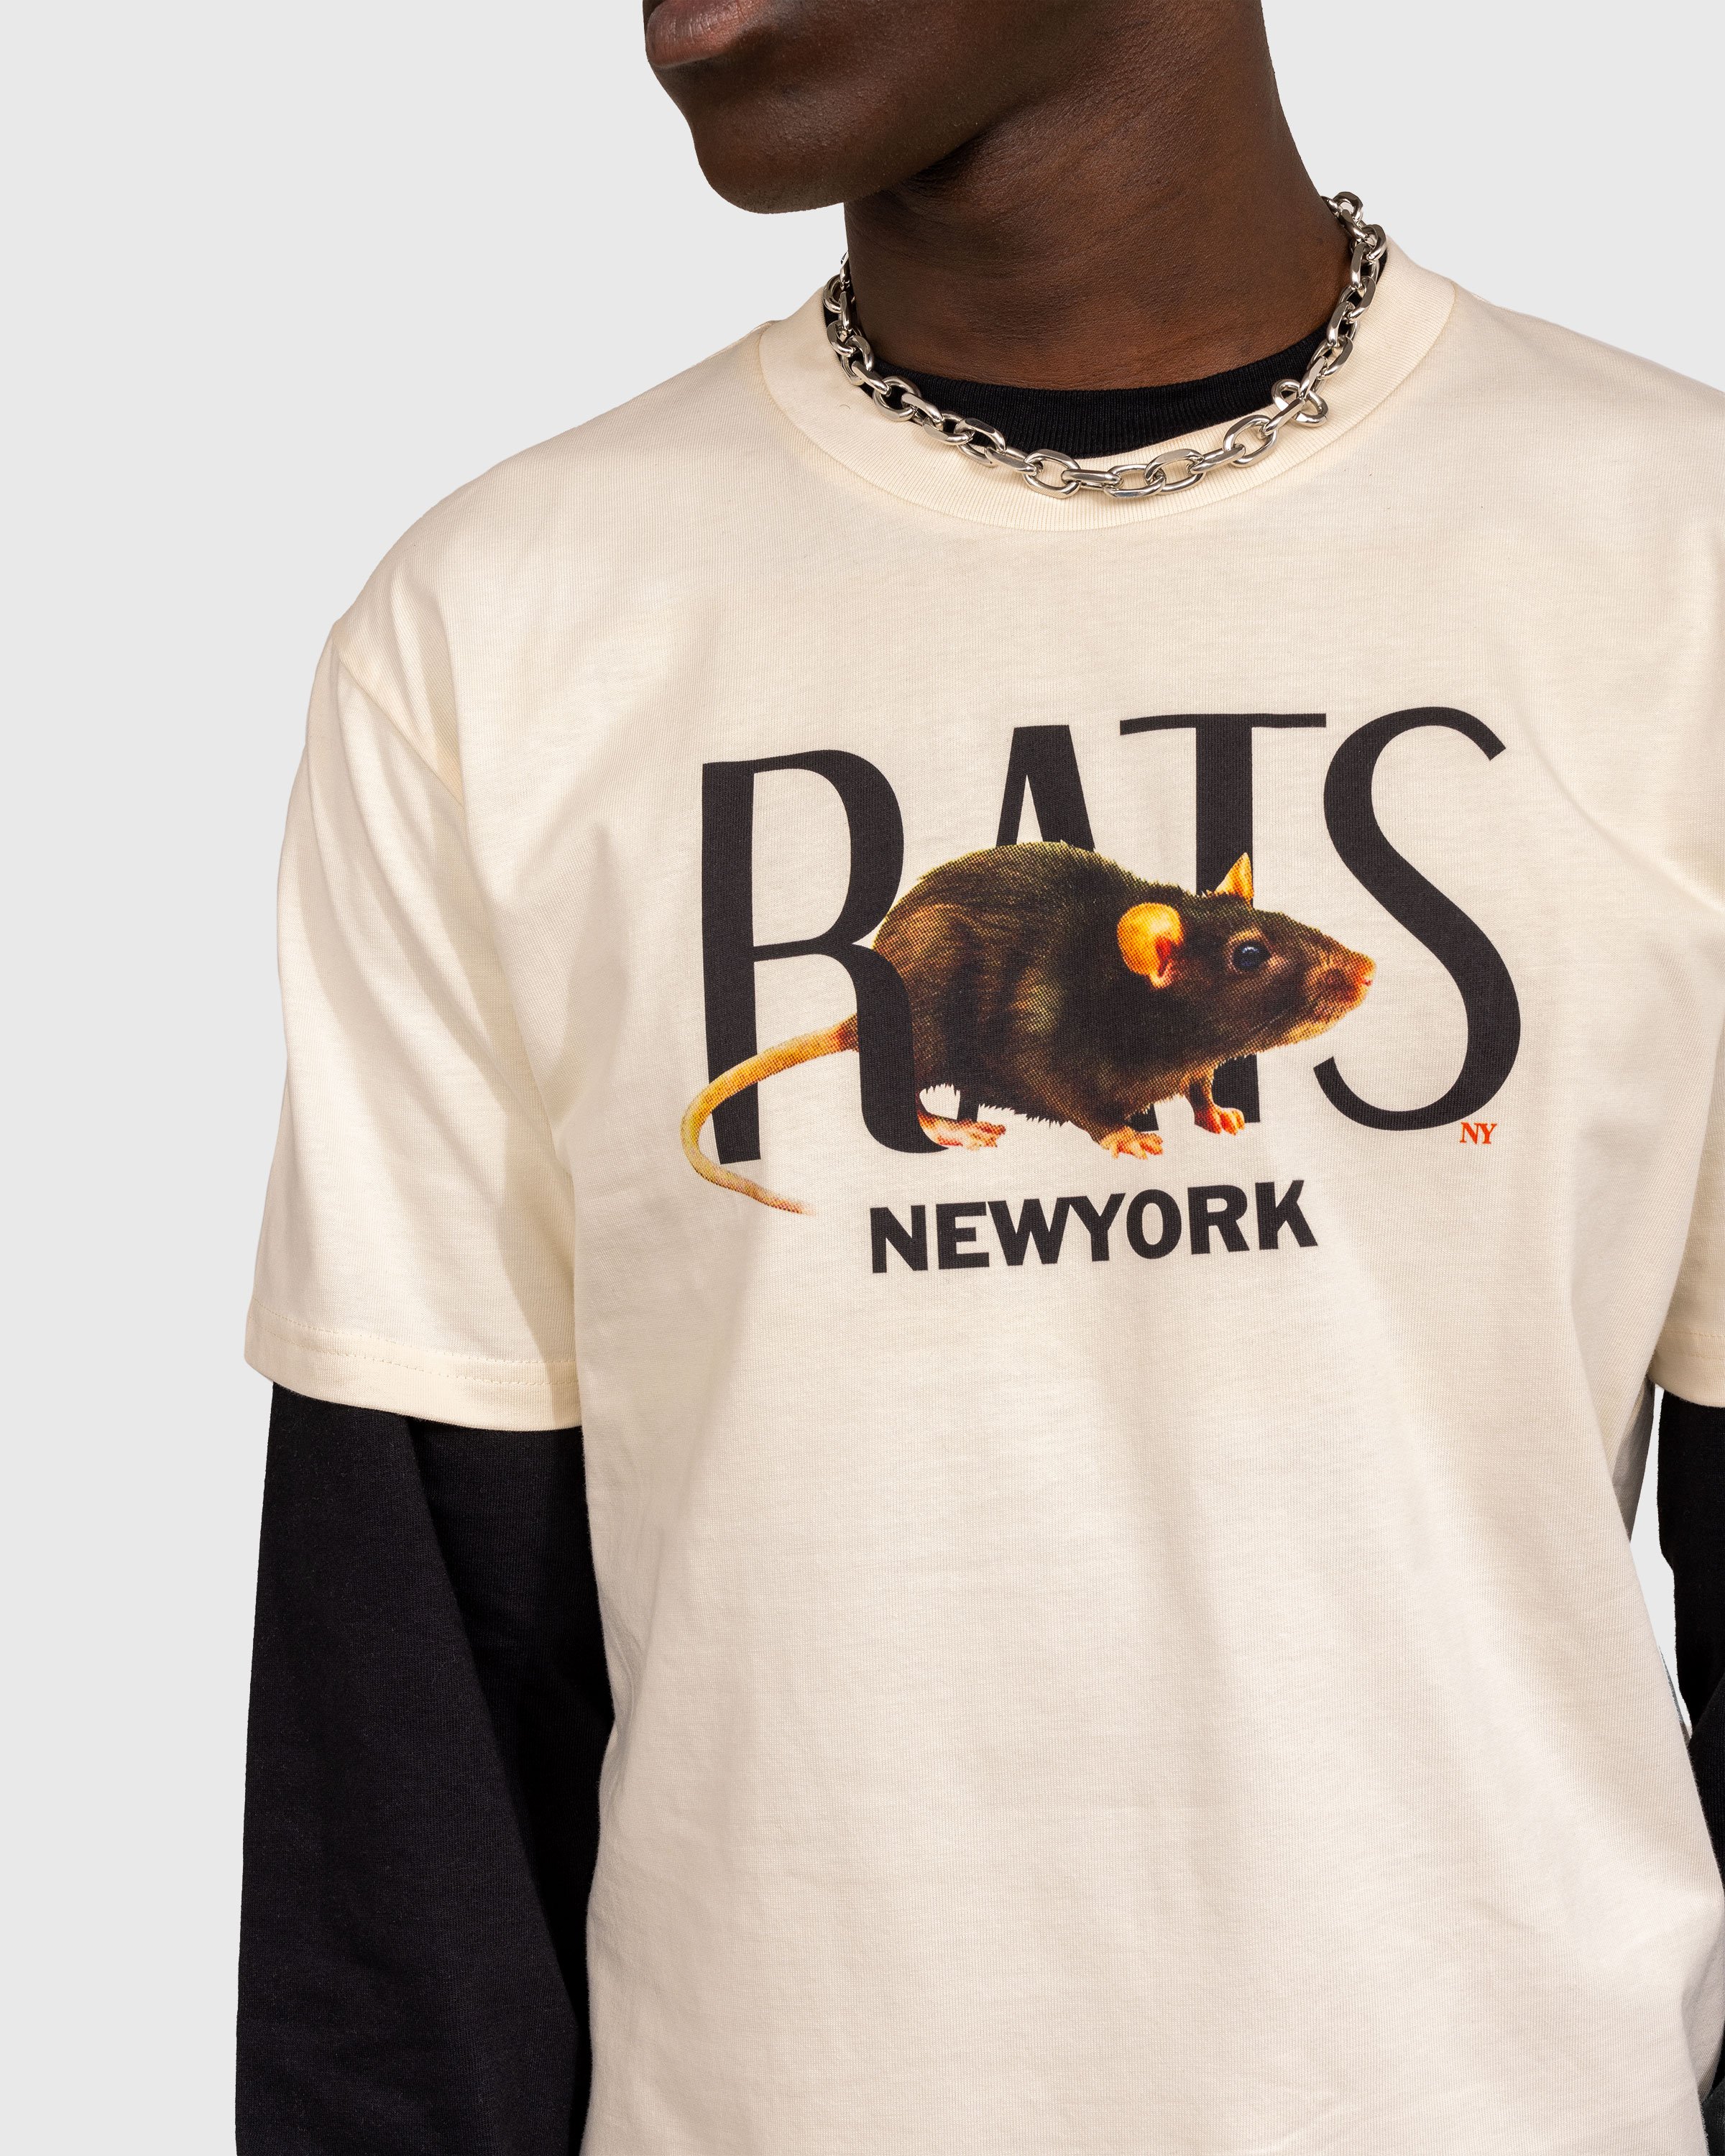 At The Moment x Highsnobiety - New York Rats T-Shirt - Clothing - Beige - Image 5